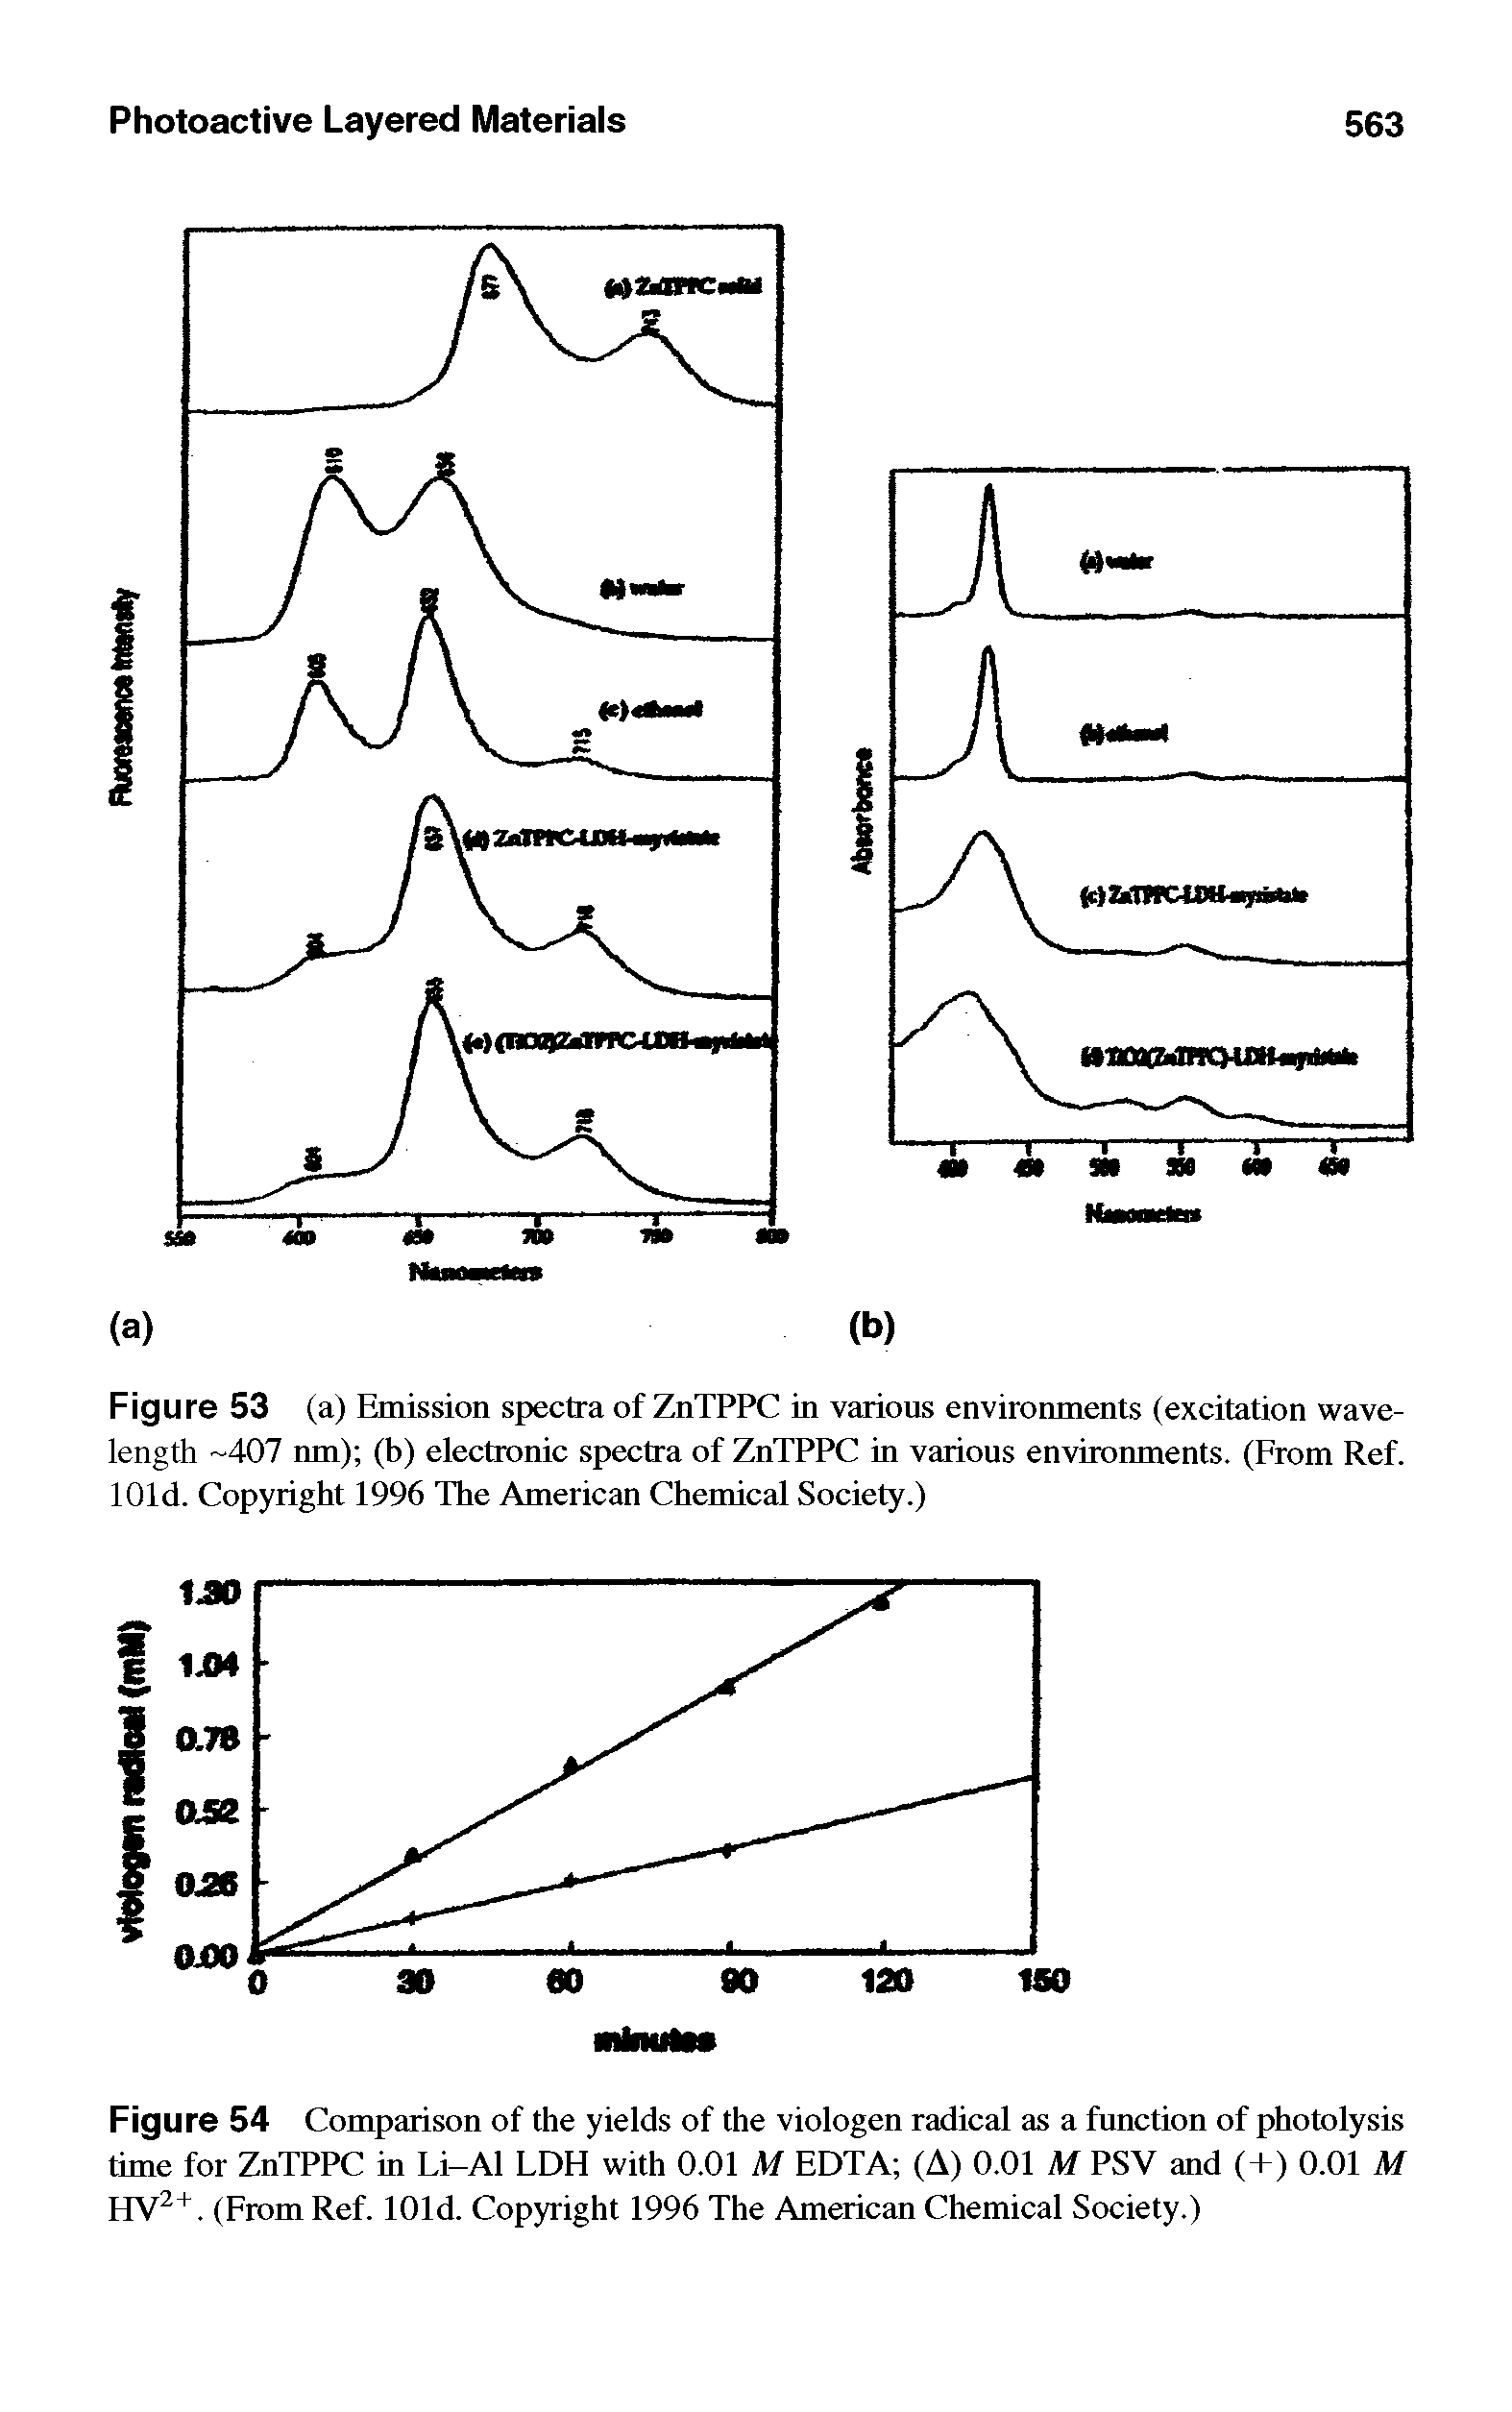 Figure 54 Comparison of the yields of the viologen radical as a function of photolysis time for ZnTPPC in Li-Al LDH with 0.01 M EDTA (A) 0.01 M PSV and (+) 0.01 M HV2+. (From Ref. lOld. Copyright 1996 The American Chemical Society.)...